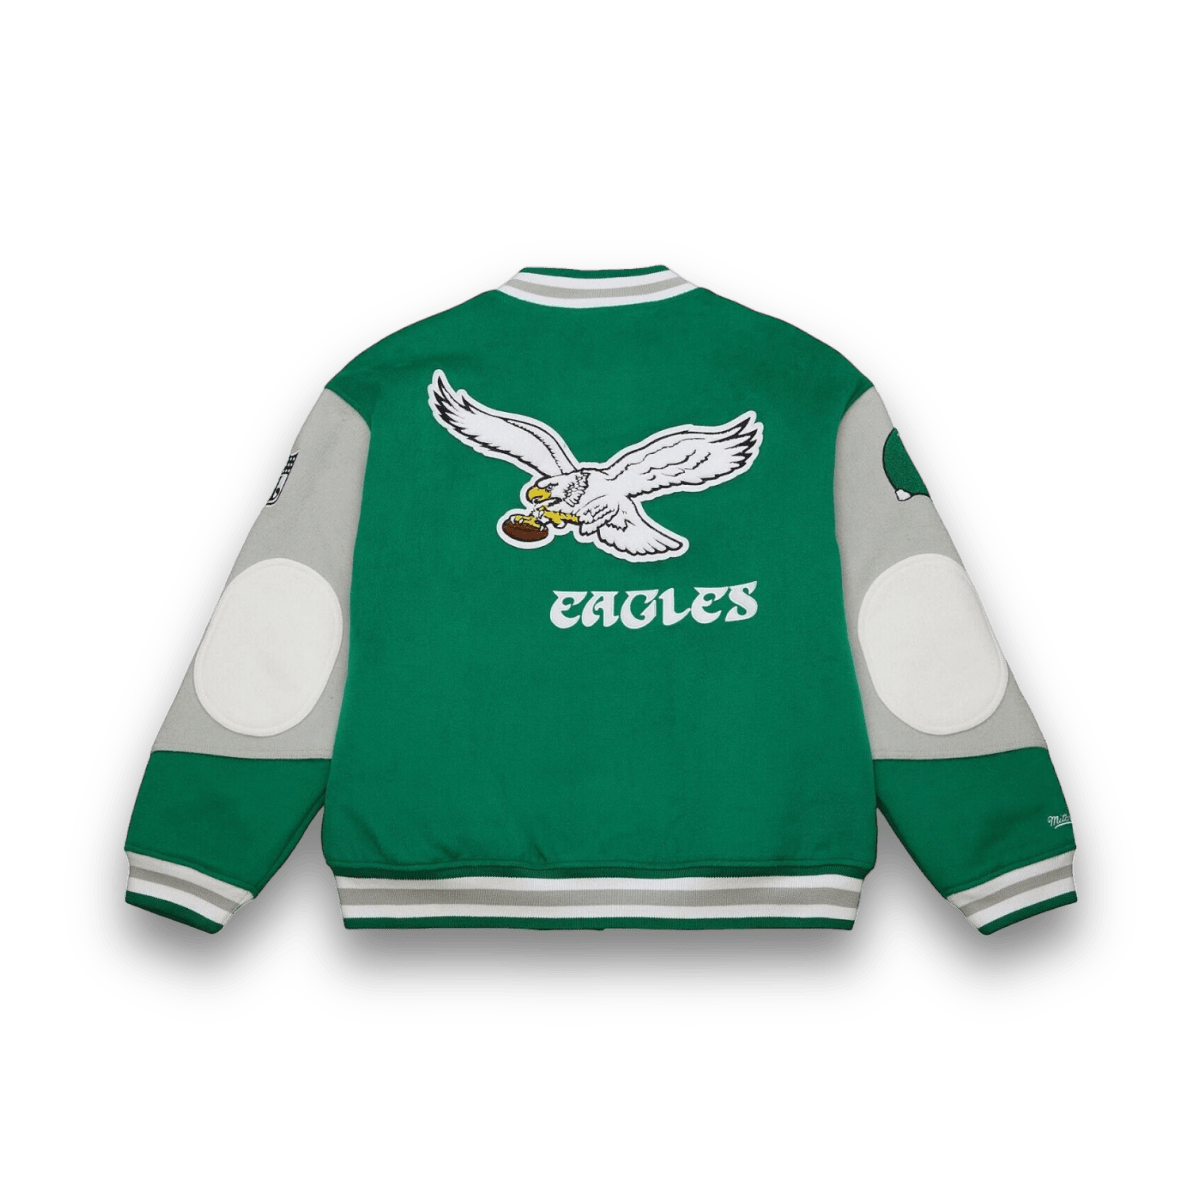 Mitchell & Ness “Princess Diana” Varsity Eagles Jacket - Outerwear - Jawns on Fire Sneakers & Streetwear